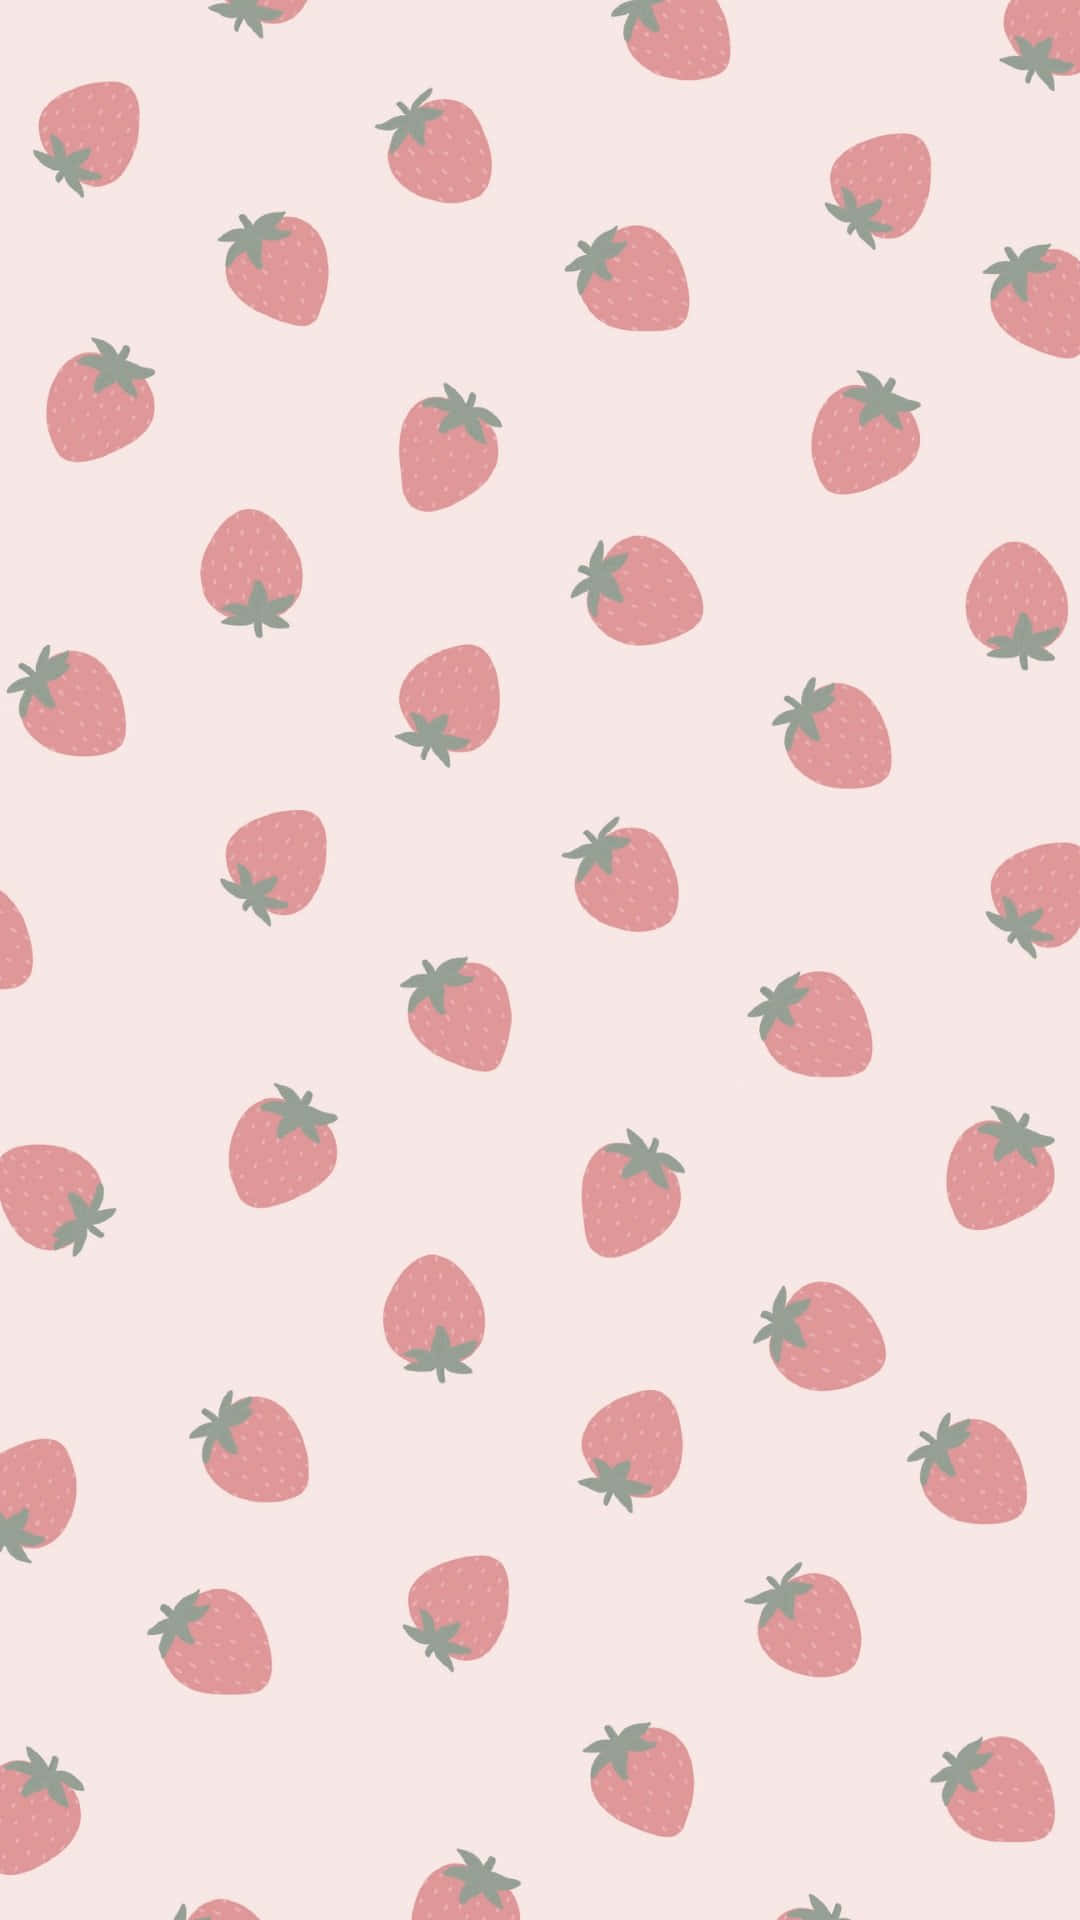 Satisfy your sweet tooth with a juicy pastel strawberry. Wallpaper